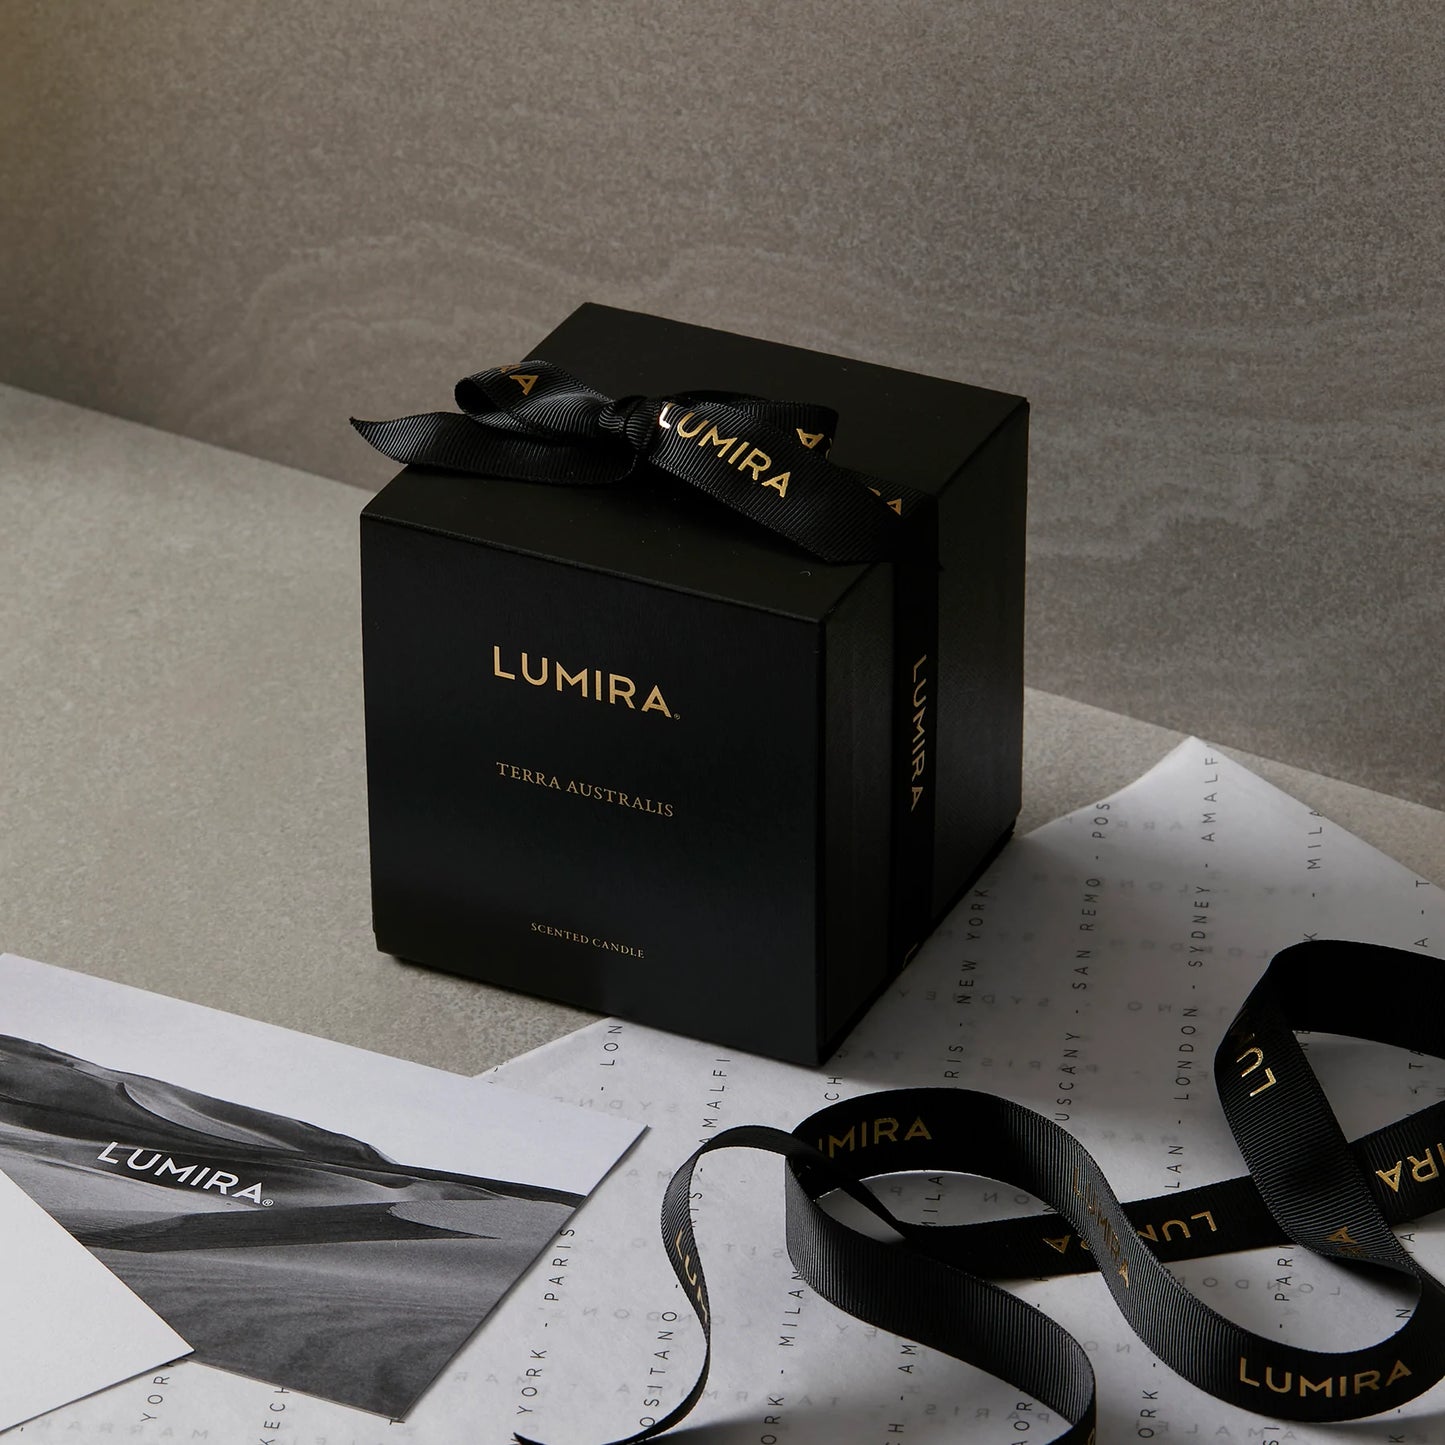 Image of a Lumira candle from Terra Cruda's home fragrance collection